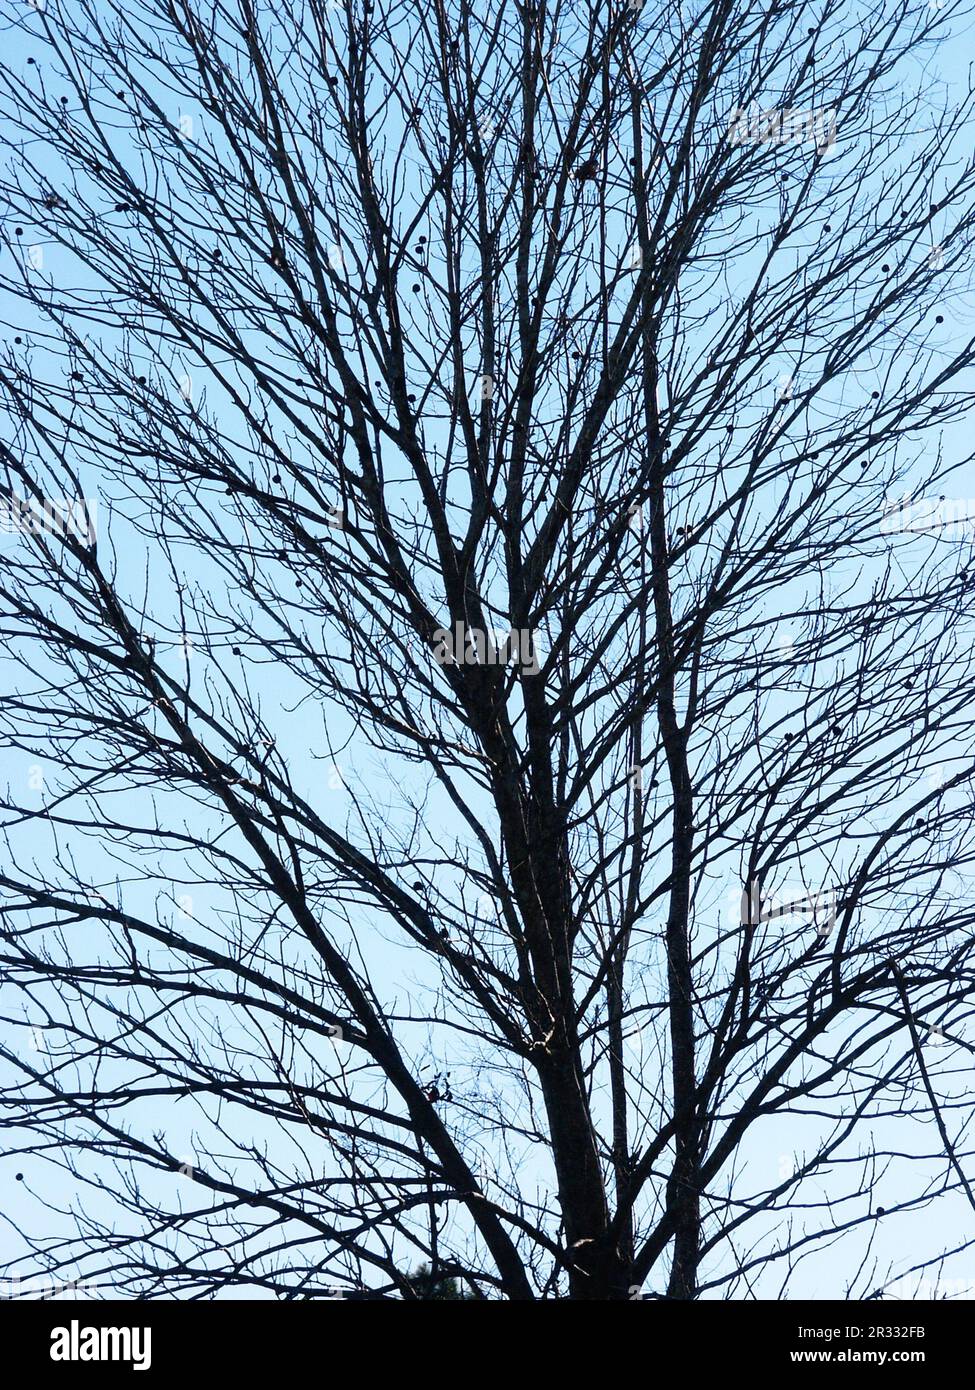 Bare winter tree silhouetted against a cloudless blue sky. Stock Photo